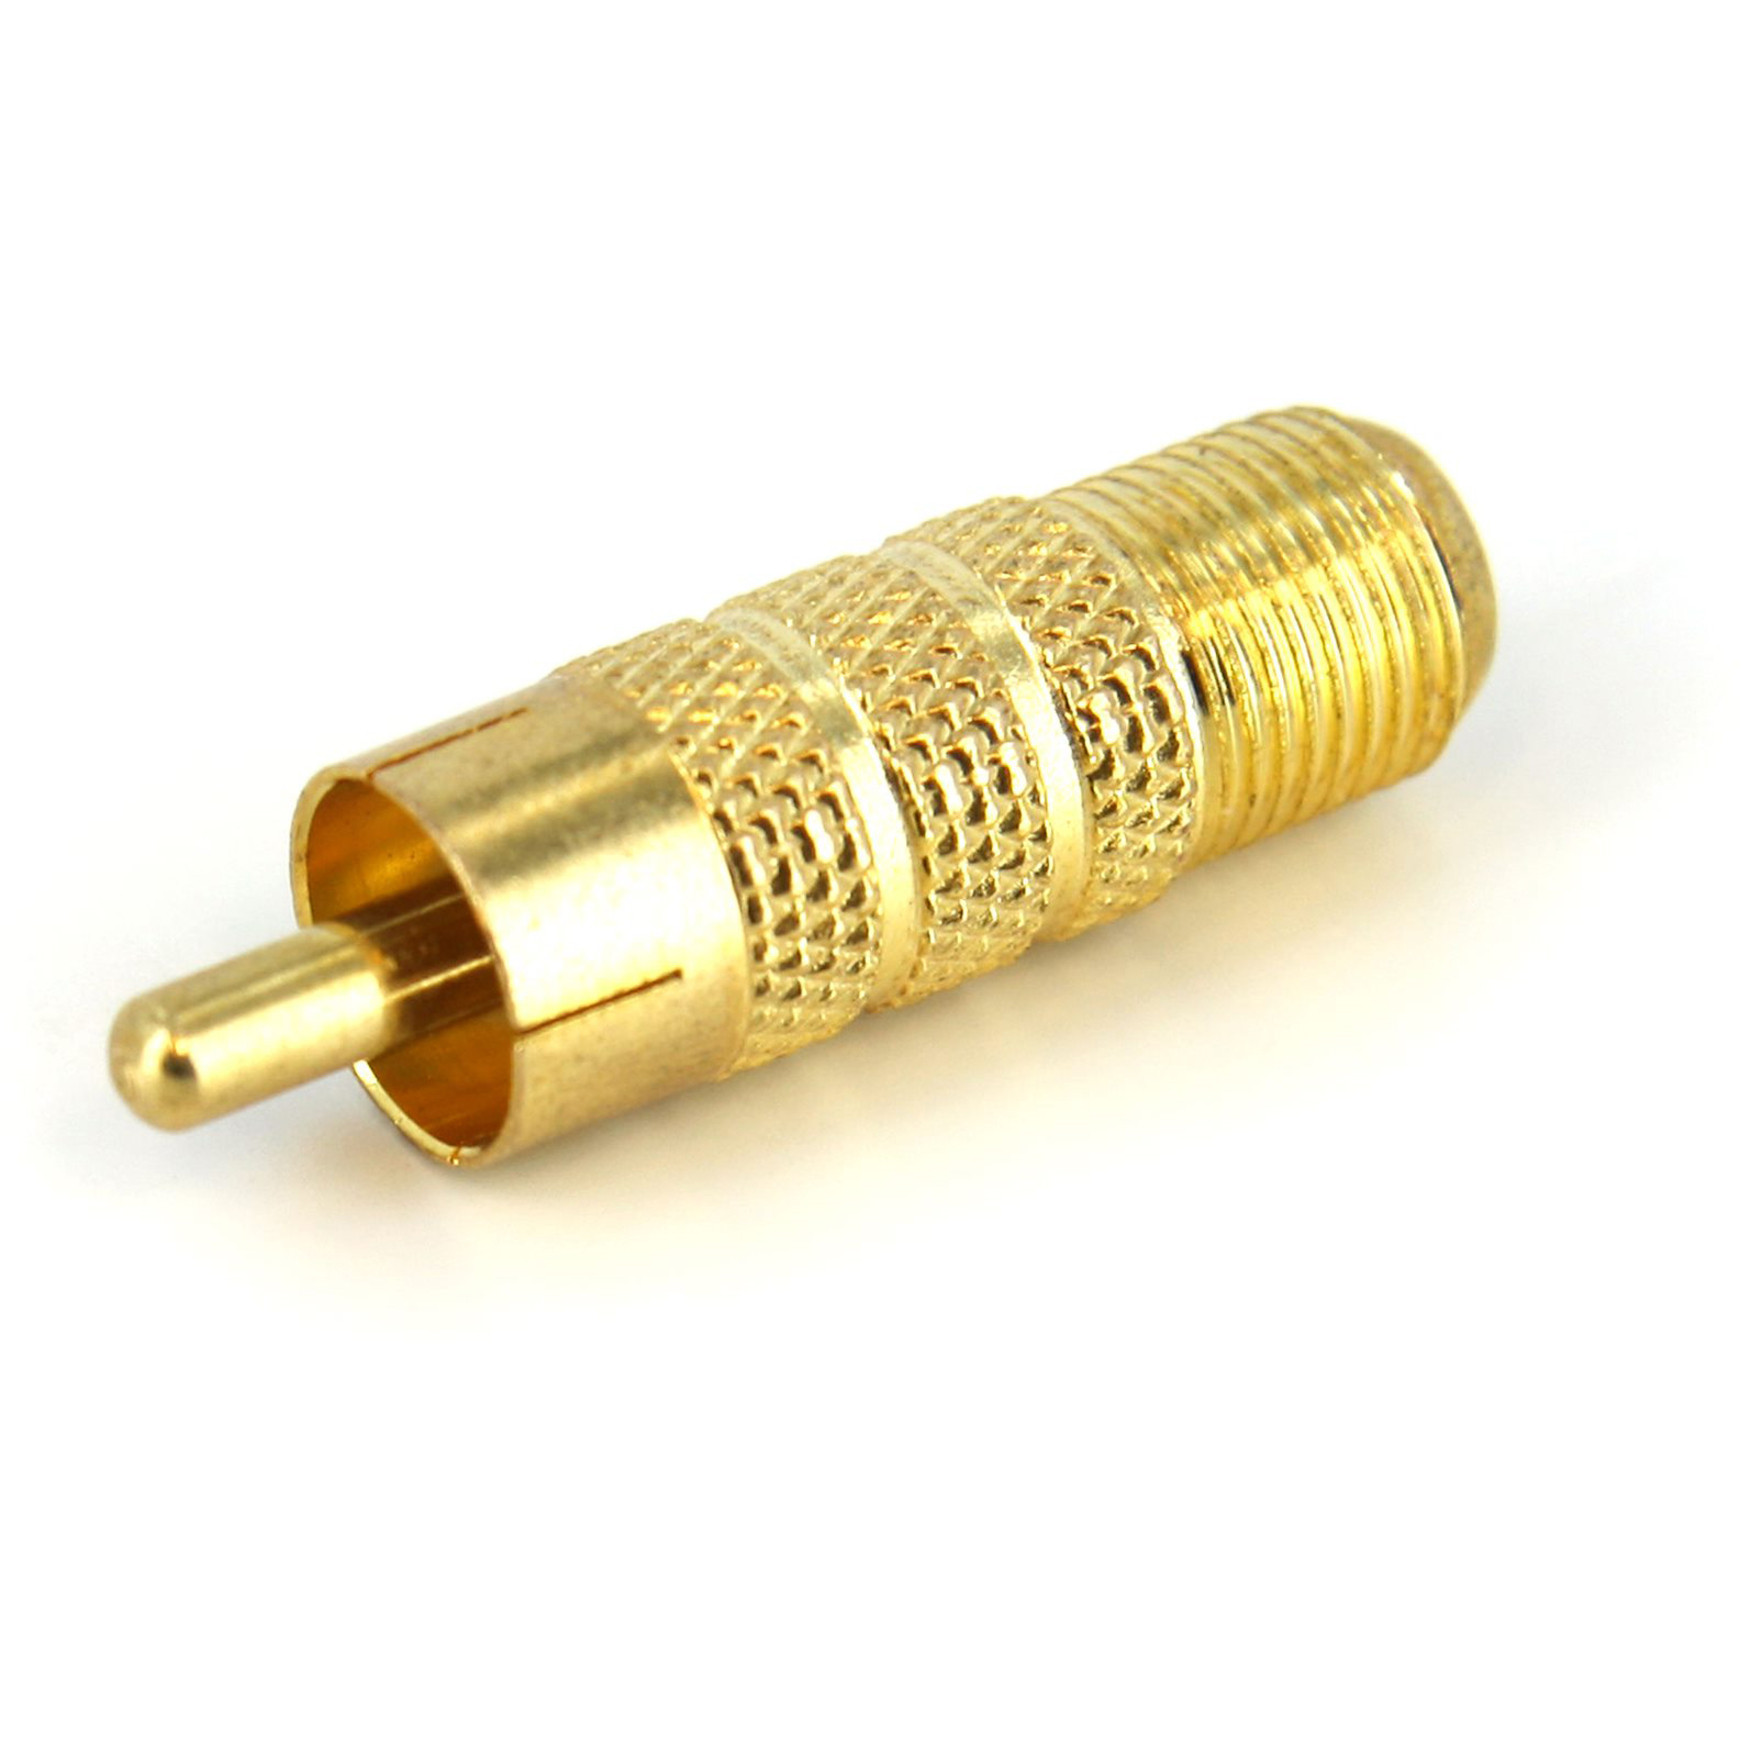 Startech .com RCA to F Type Coaxial Adapter M/F1 x F Connector Female Audio/Video1 x RCA Male Audio/VideoGold-plated ConnectorsGold RCACOAXMF